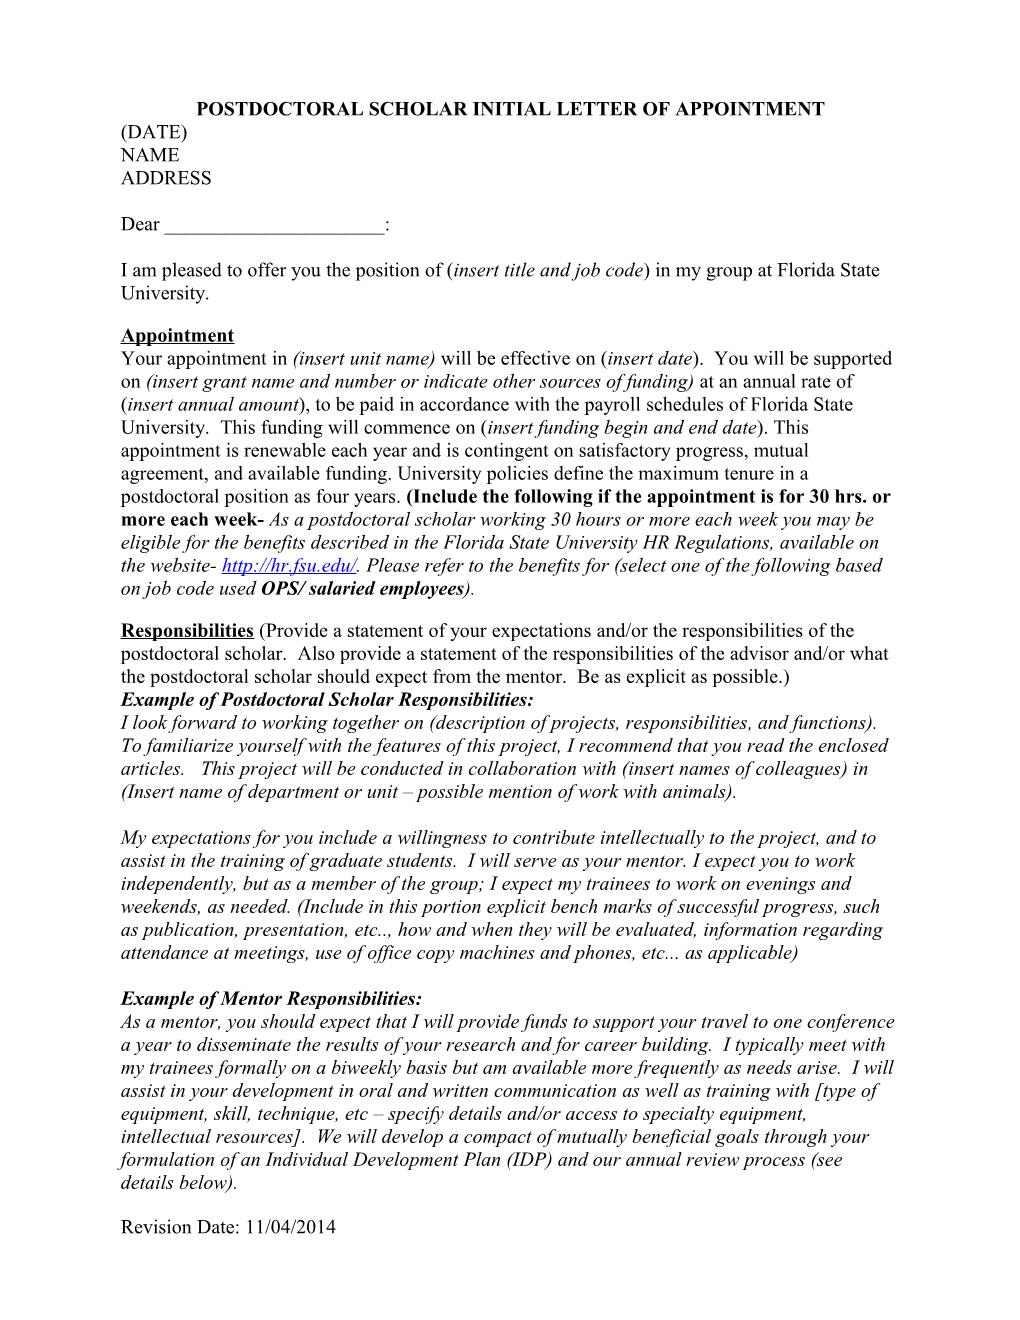 Postdoctoral Scholar Initial Letter of Appointment